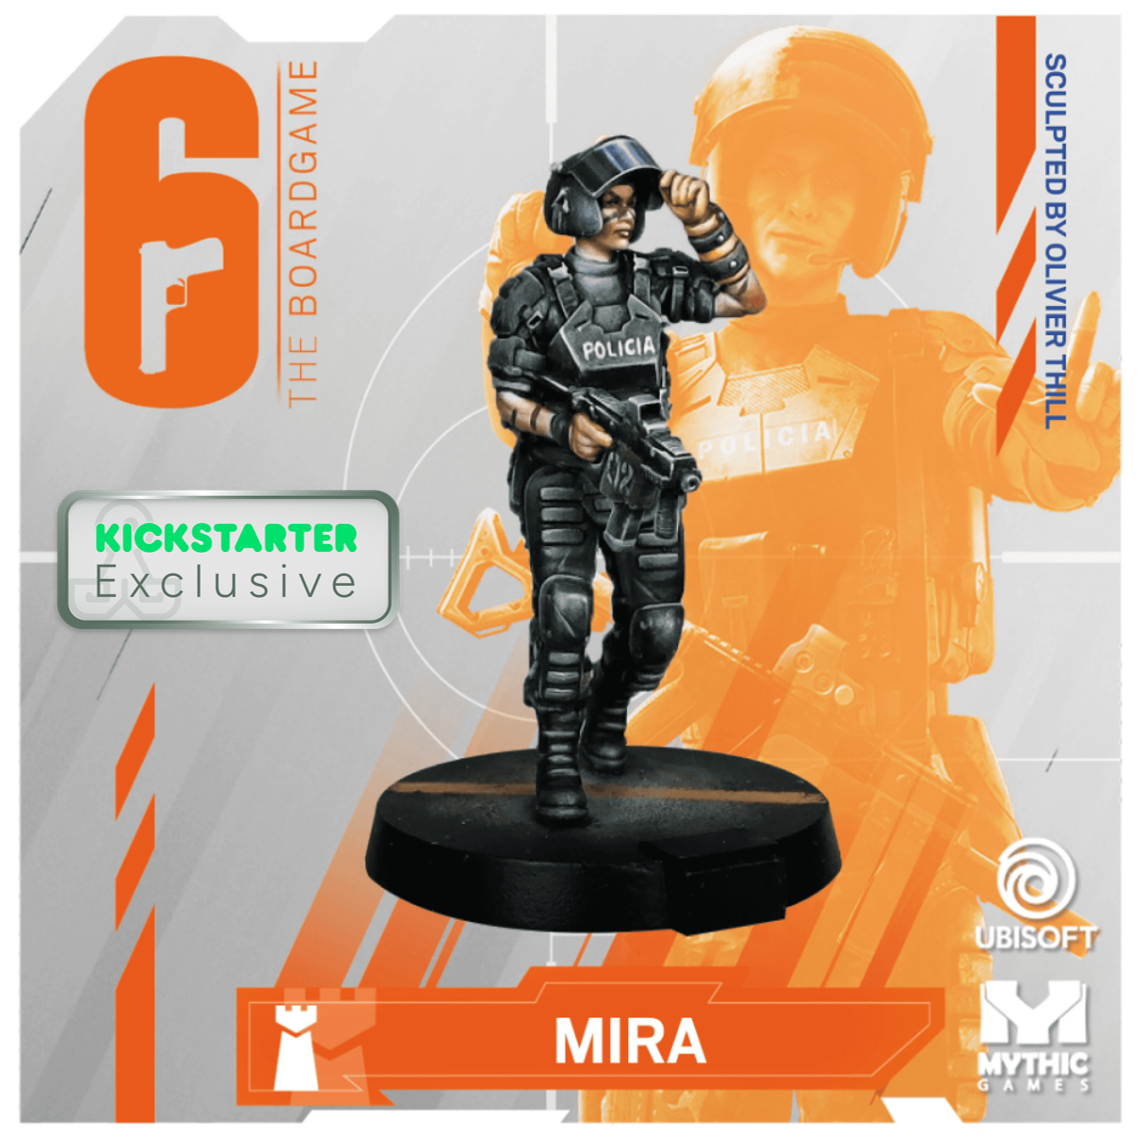 Kickstarter Exclusive Year 2 Expansion, Mira Miniature, From 6: Siege - The Board Game